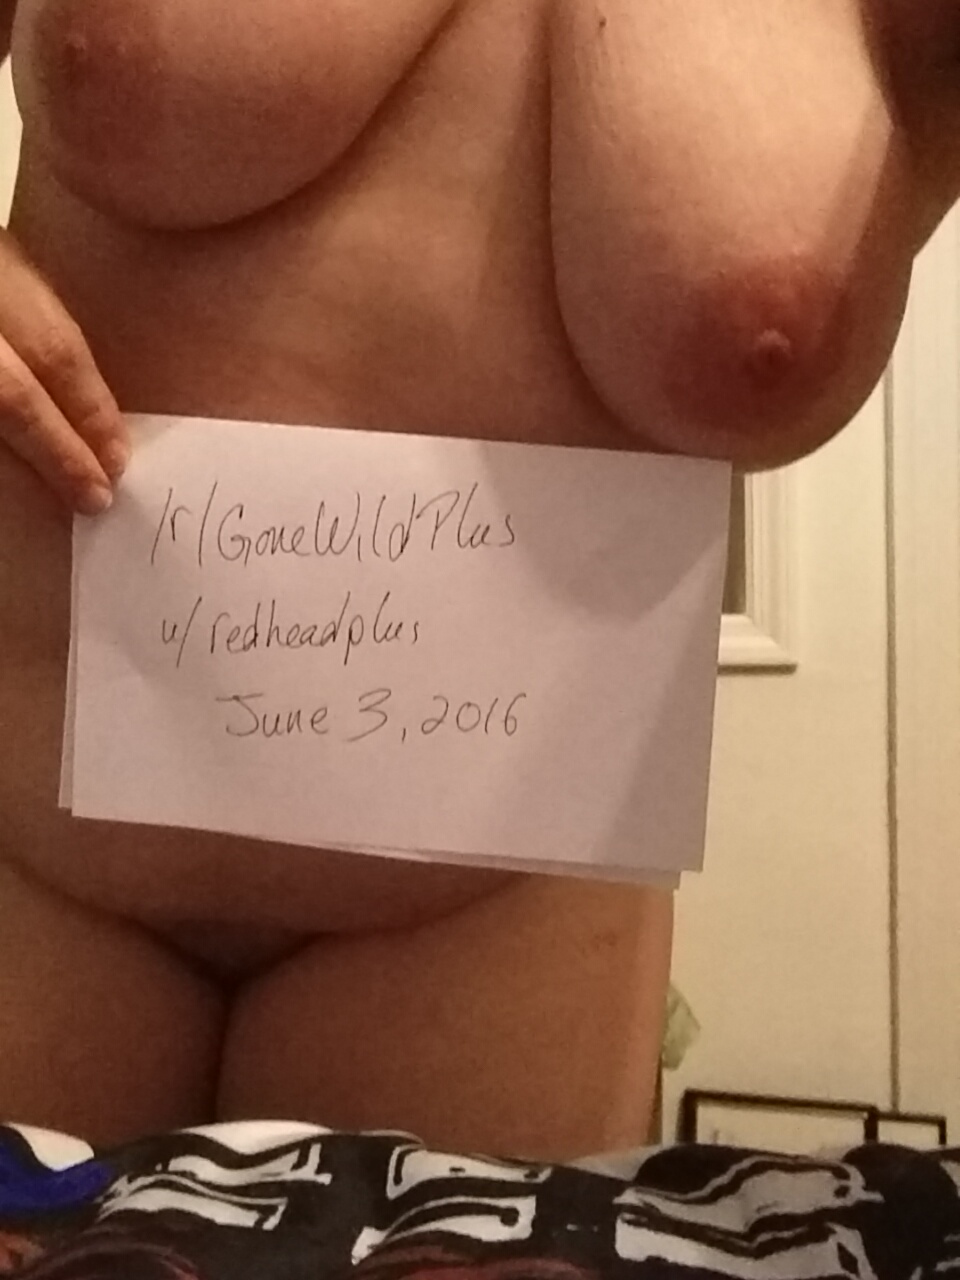 (verification) nothing kinky this time. Just plain old me.